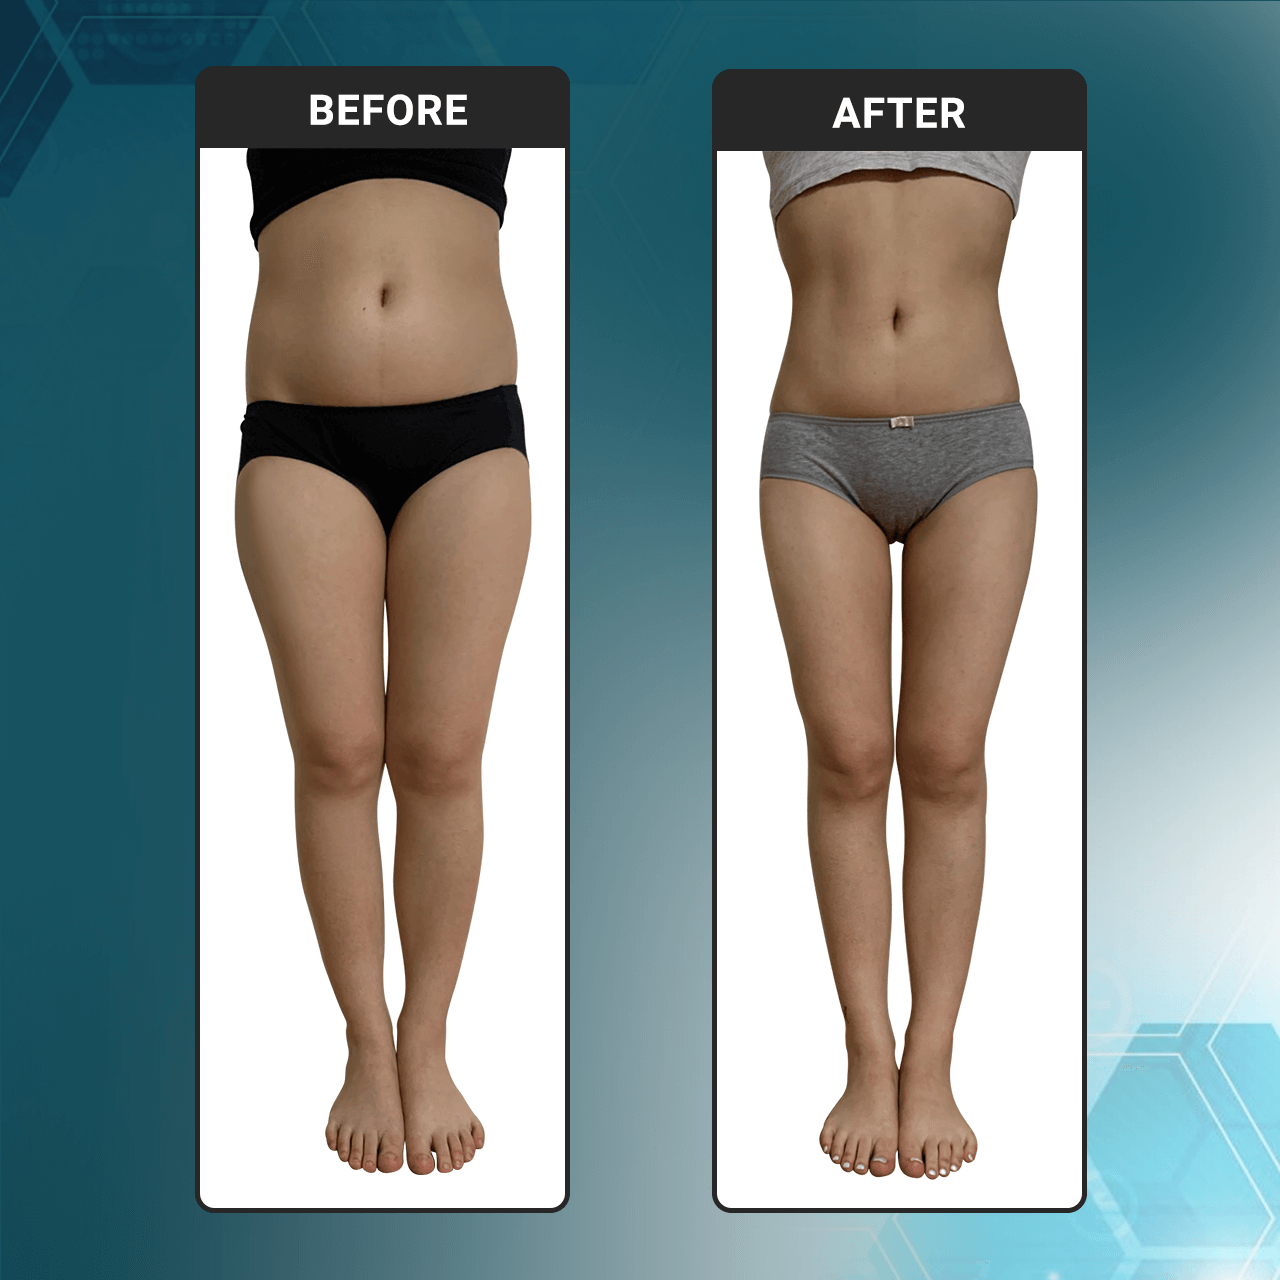 Body Contouring Before And After - Body Contouring